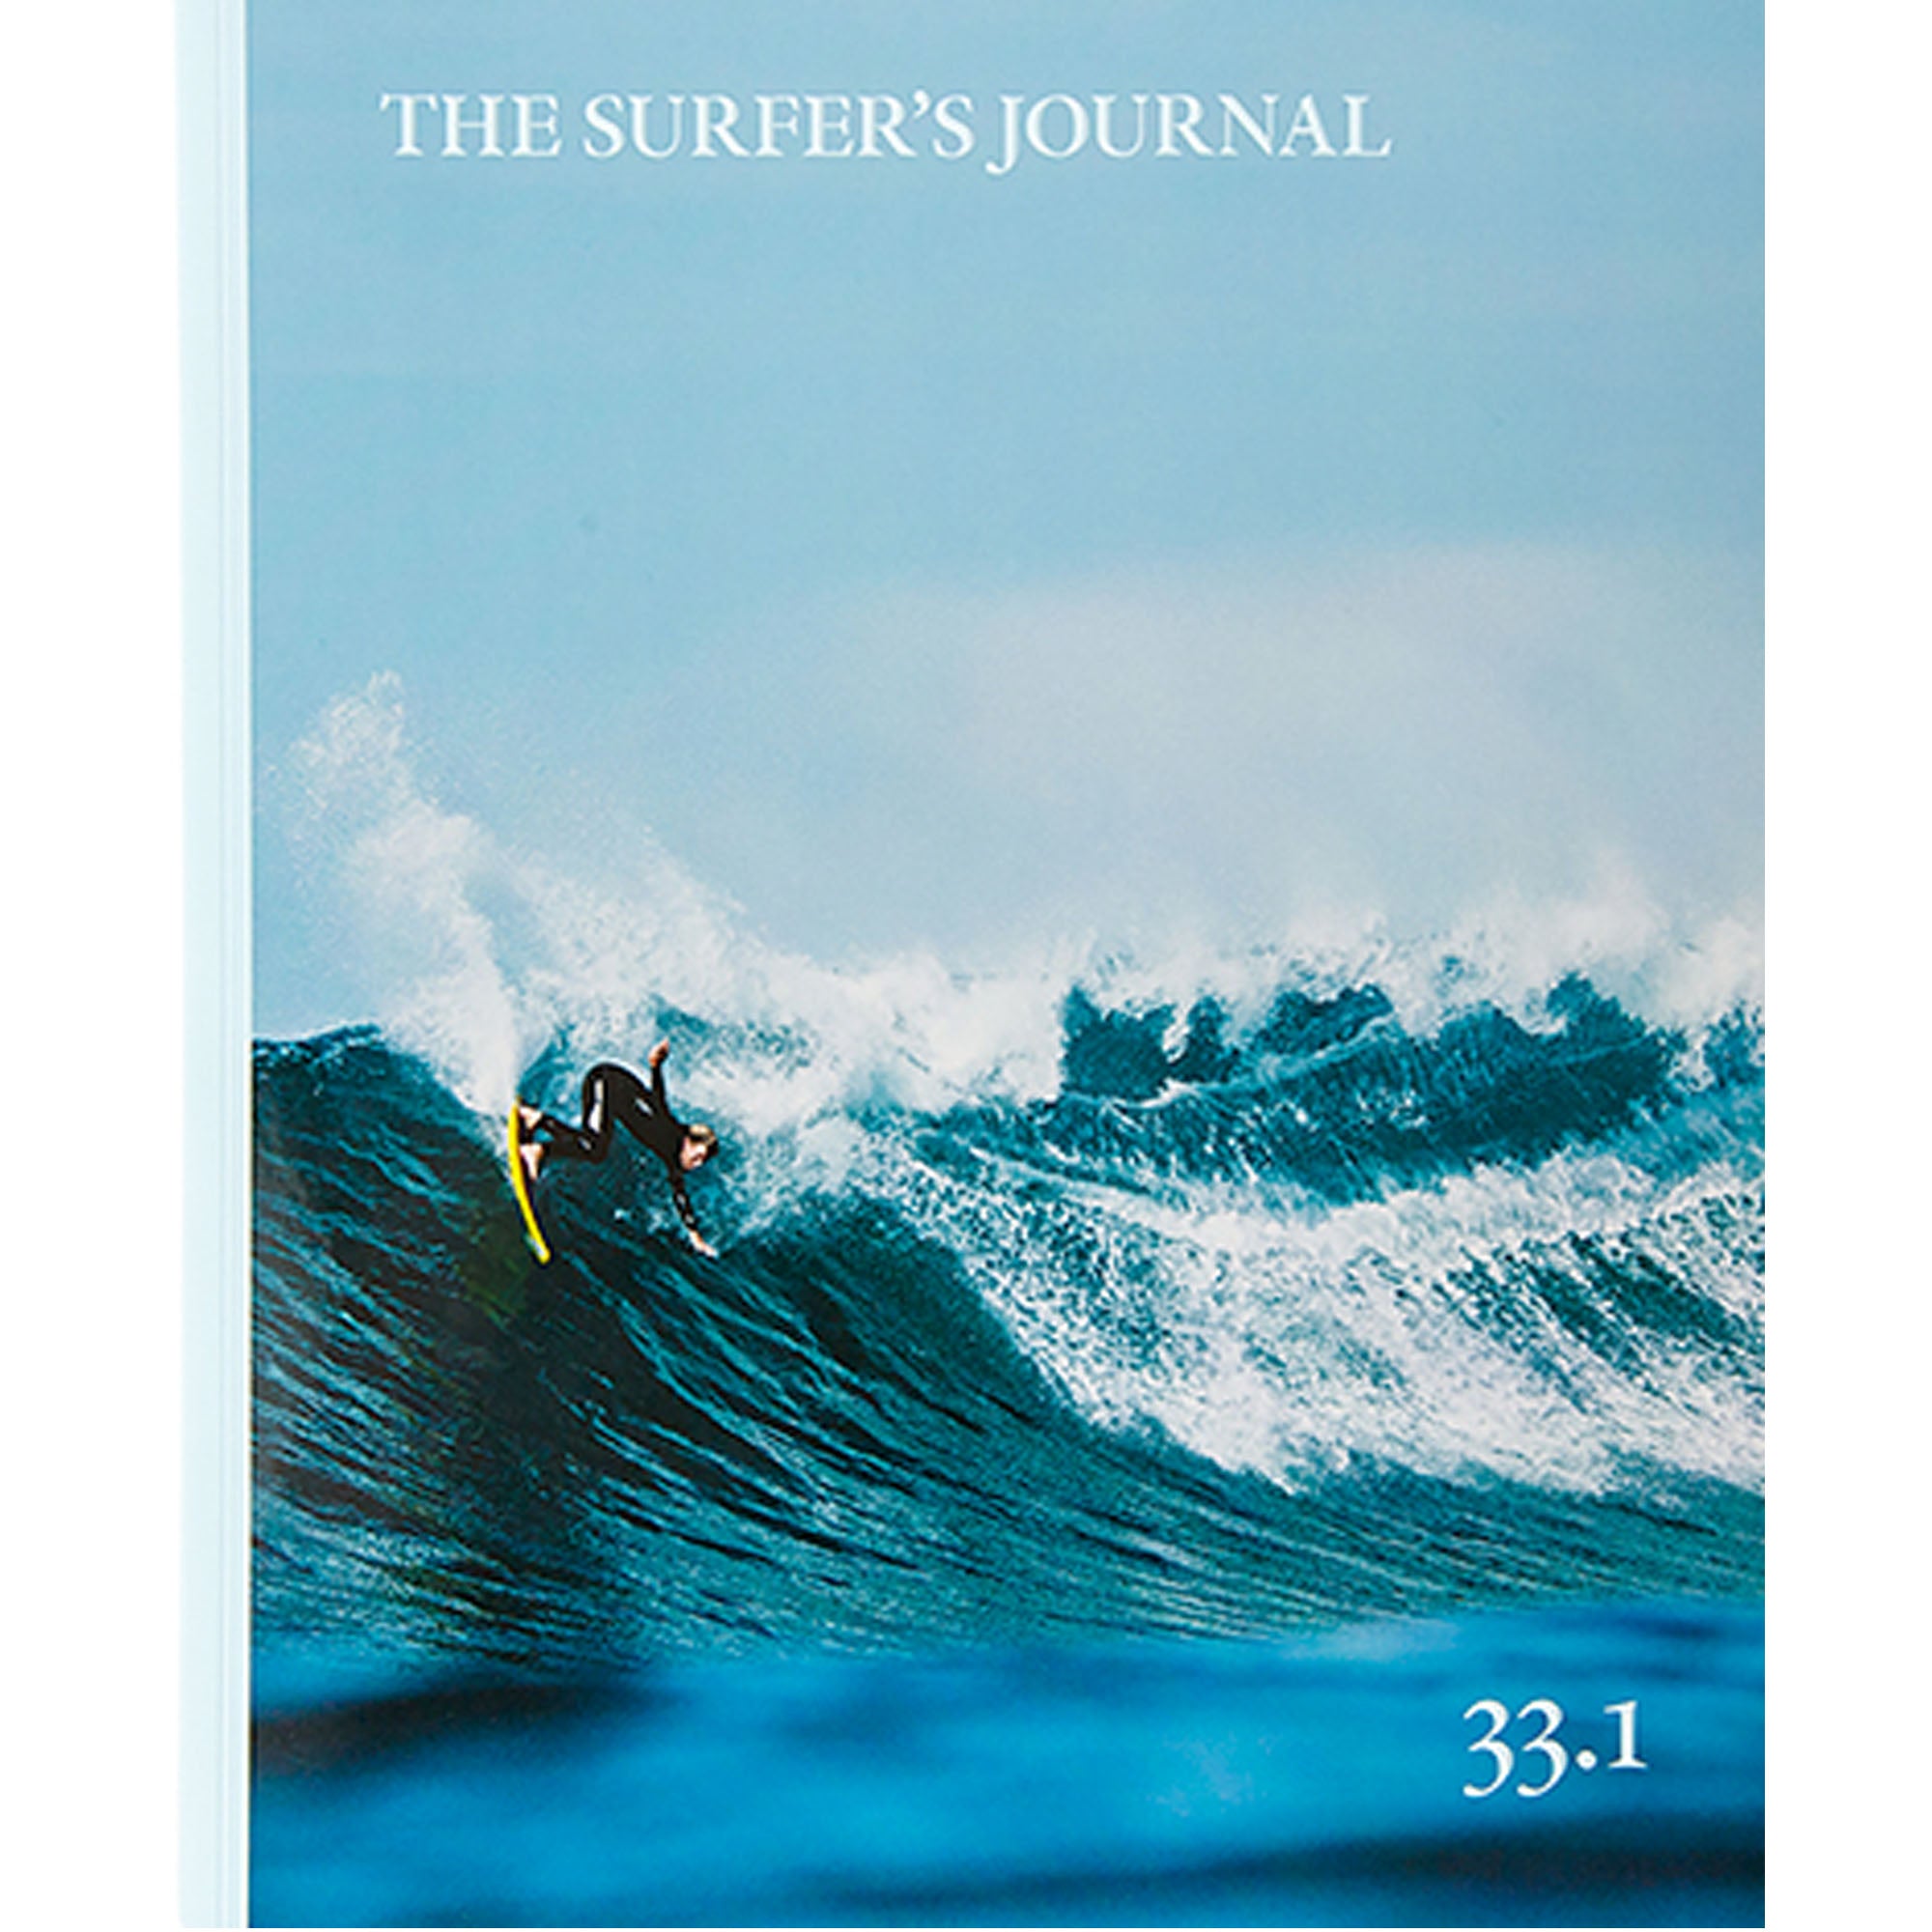 The Surfer Journal #33.1